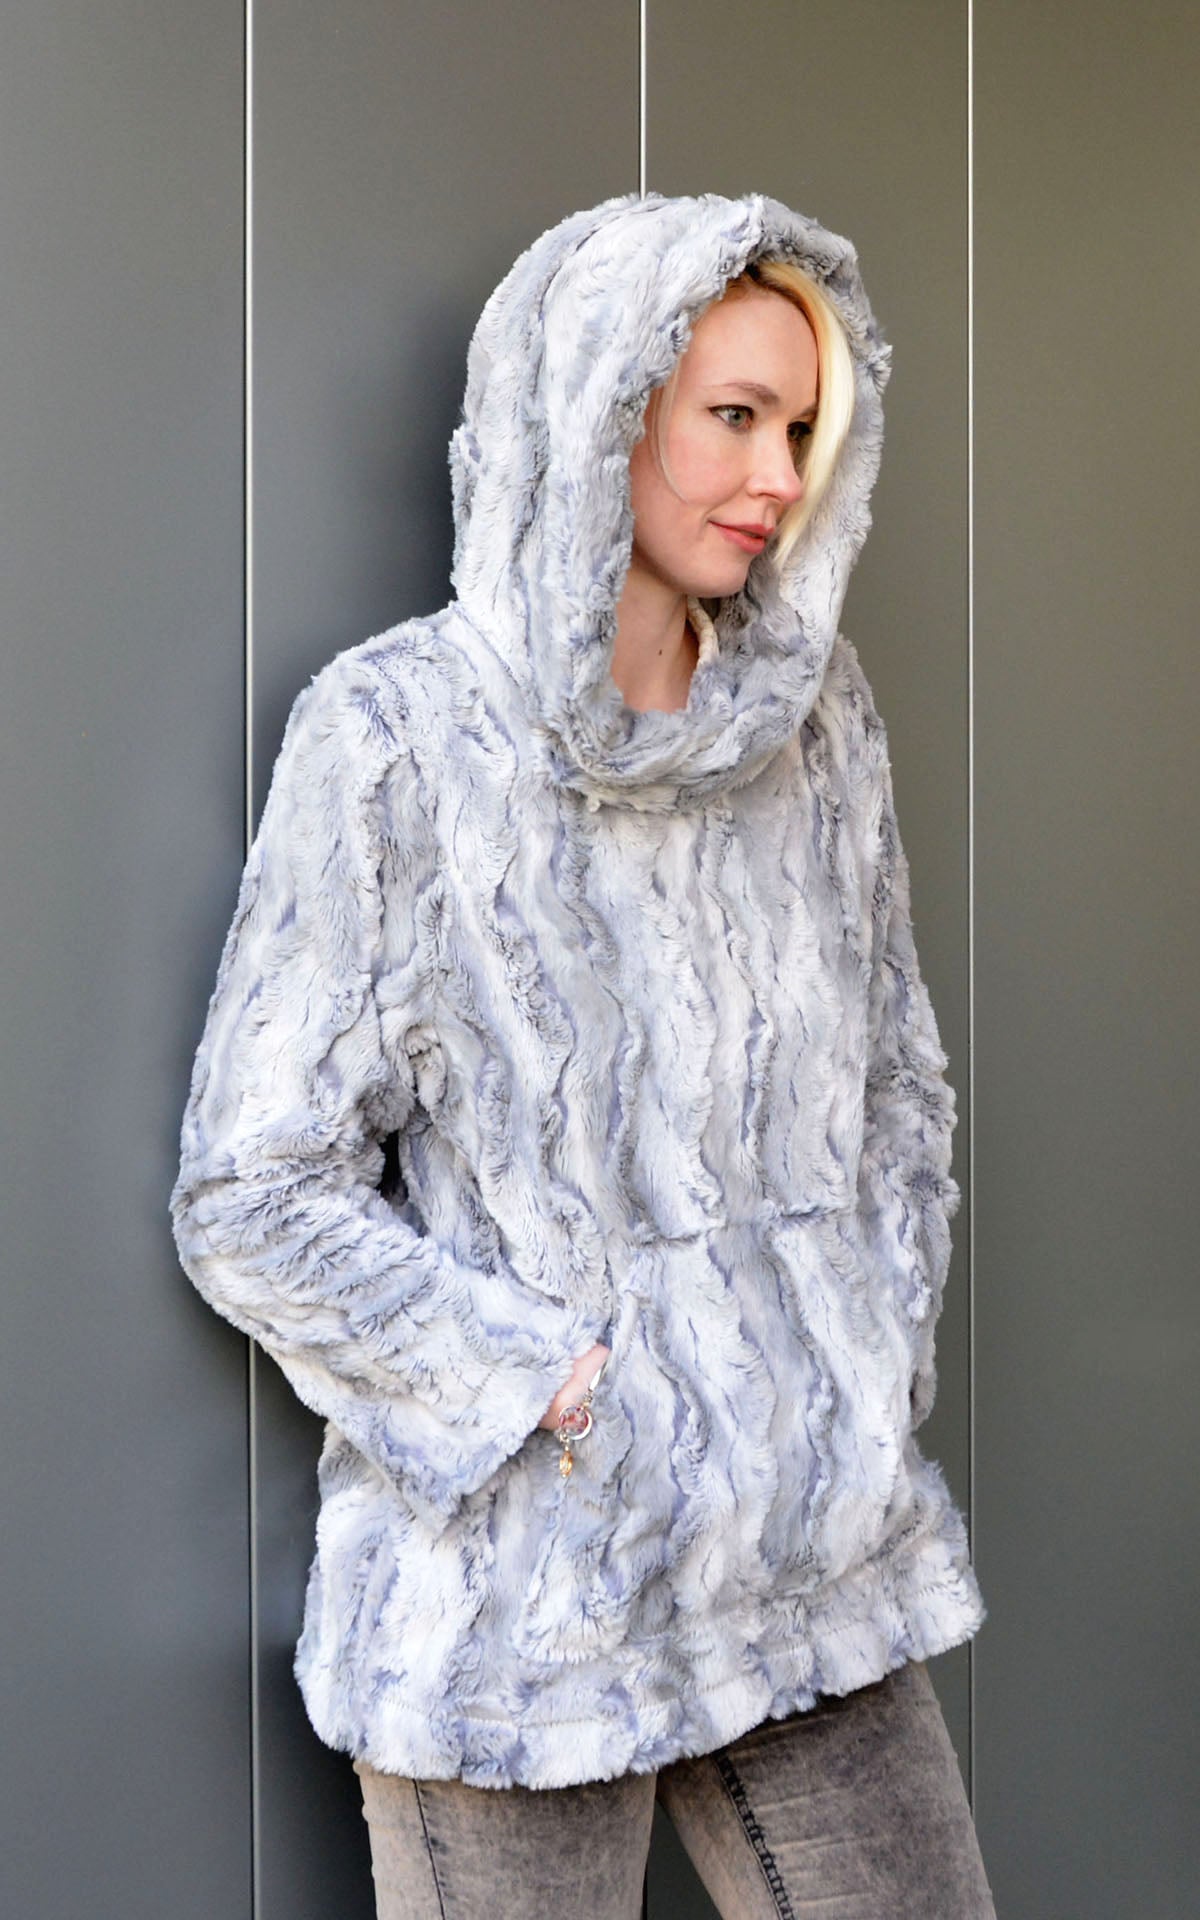 Hoody Lounger with hood up | Luxury Faux Fur in Winter River Faux Fur Blue Gray with a hint of Periwinkle | Handmade By Pandemonium Millinery | Seattle WA